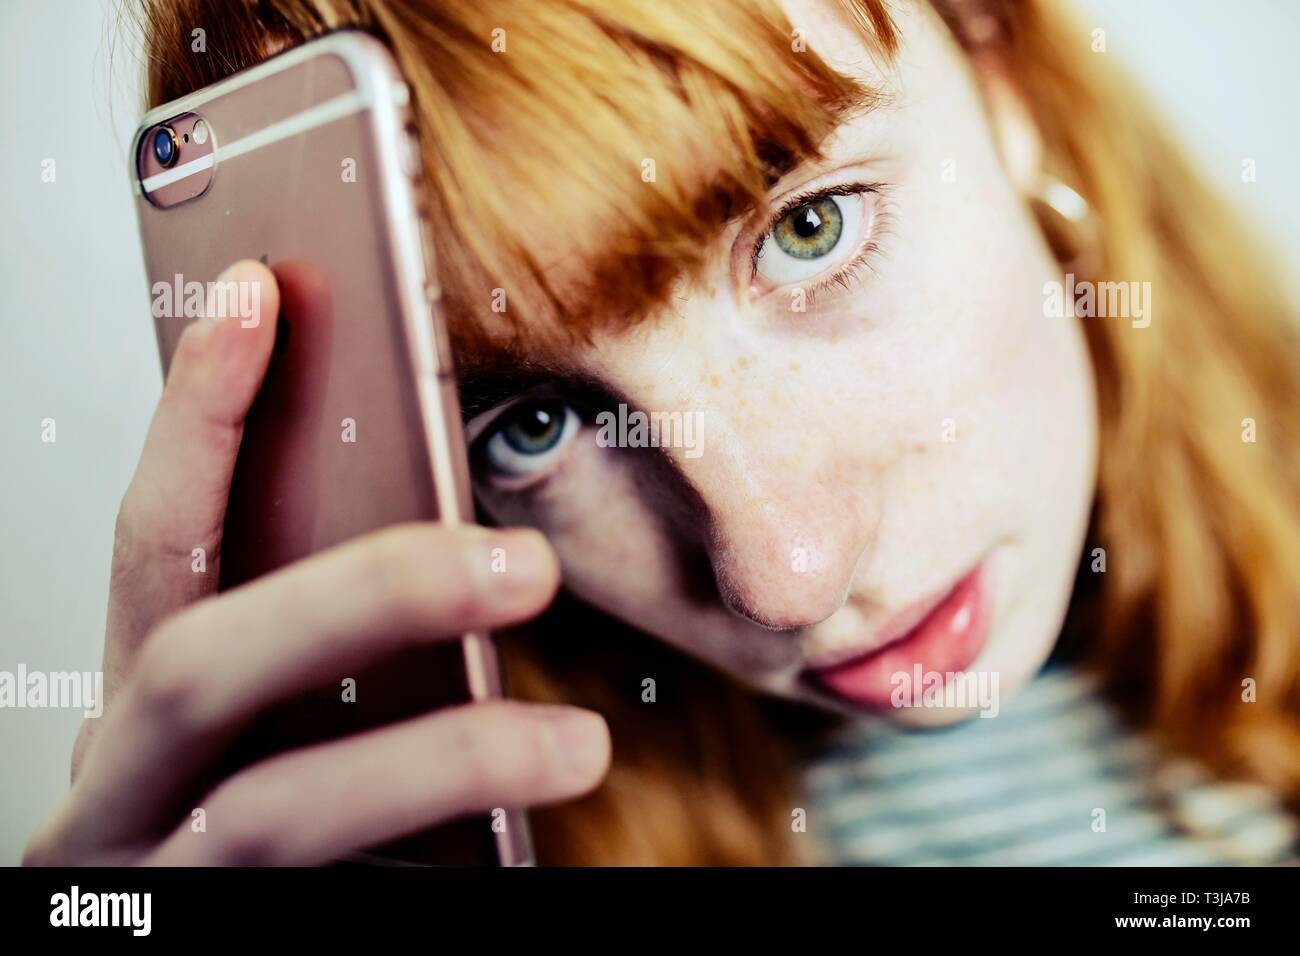 Girl, teenager, red-haired, holds annoyed smartphone to head, studio shot, Germany Stock Photo